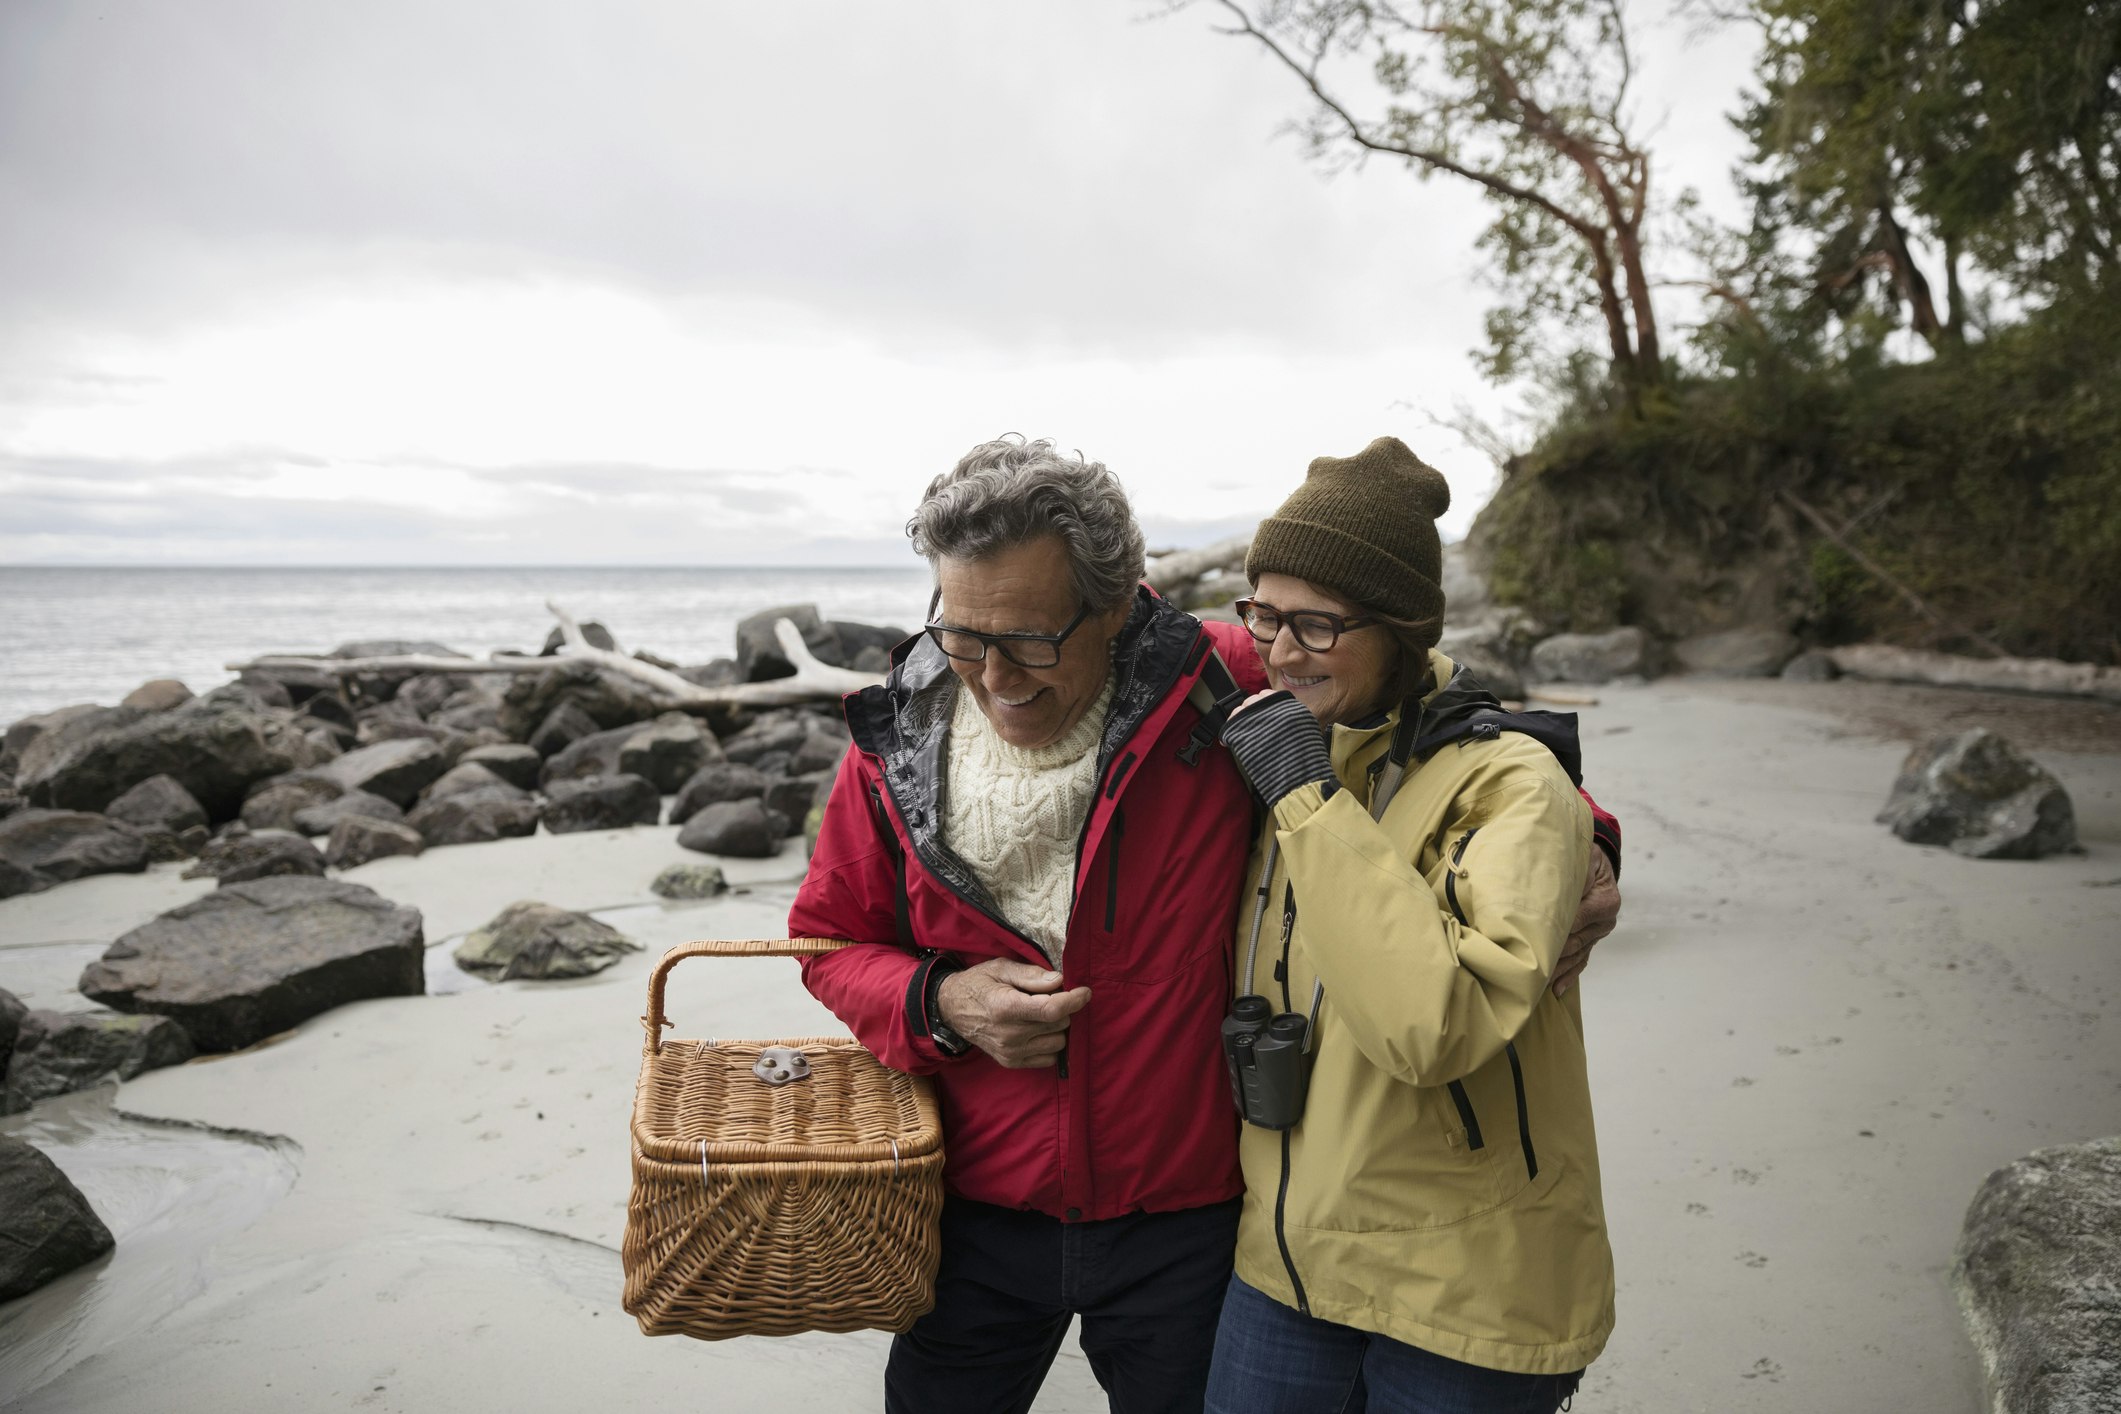 A couple laughs while carrying a picnic basket on the beach, dressed for a cold, drizzly day